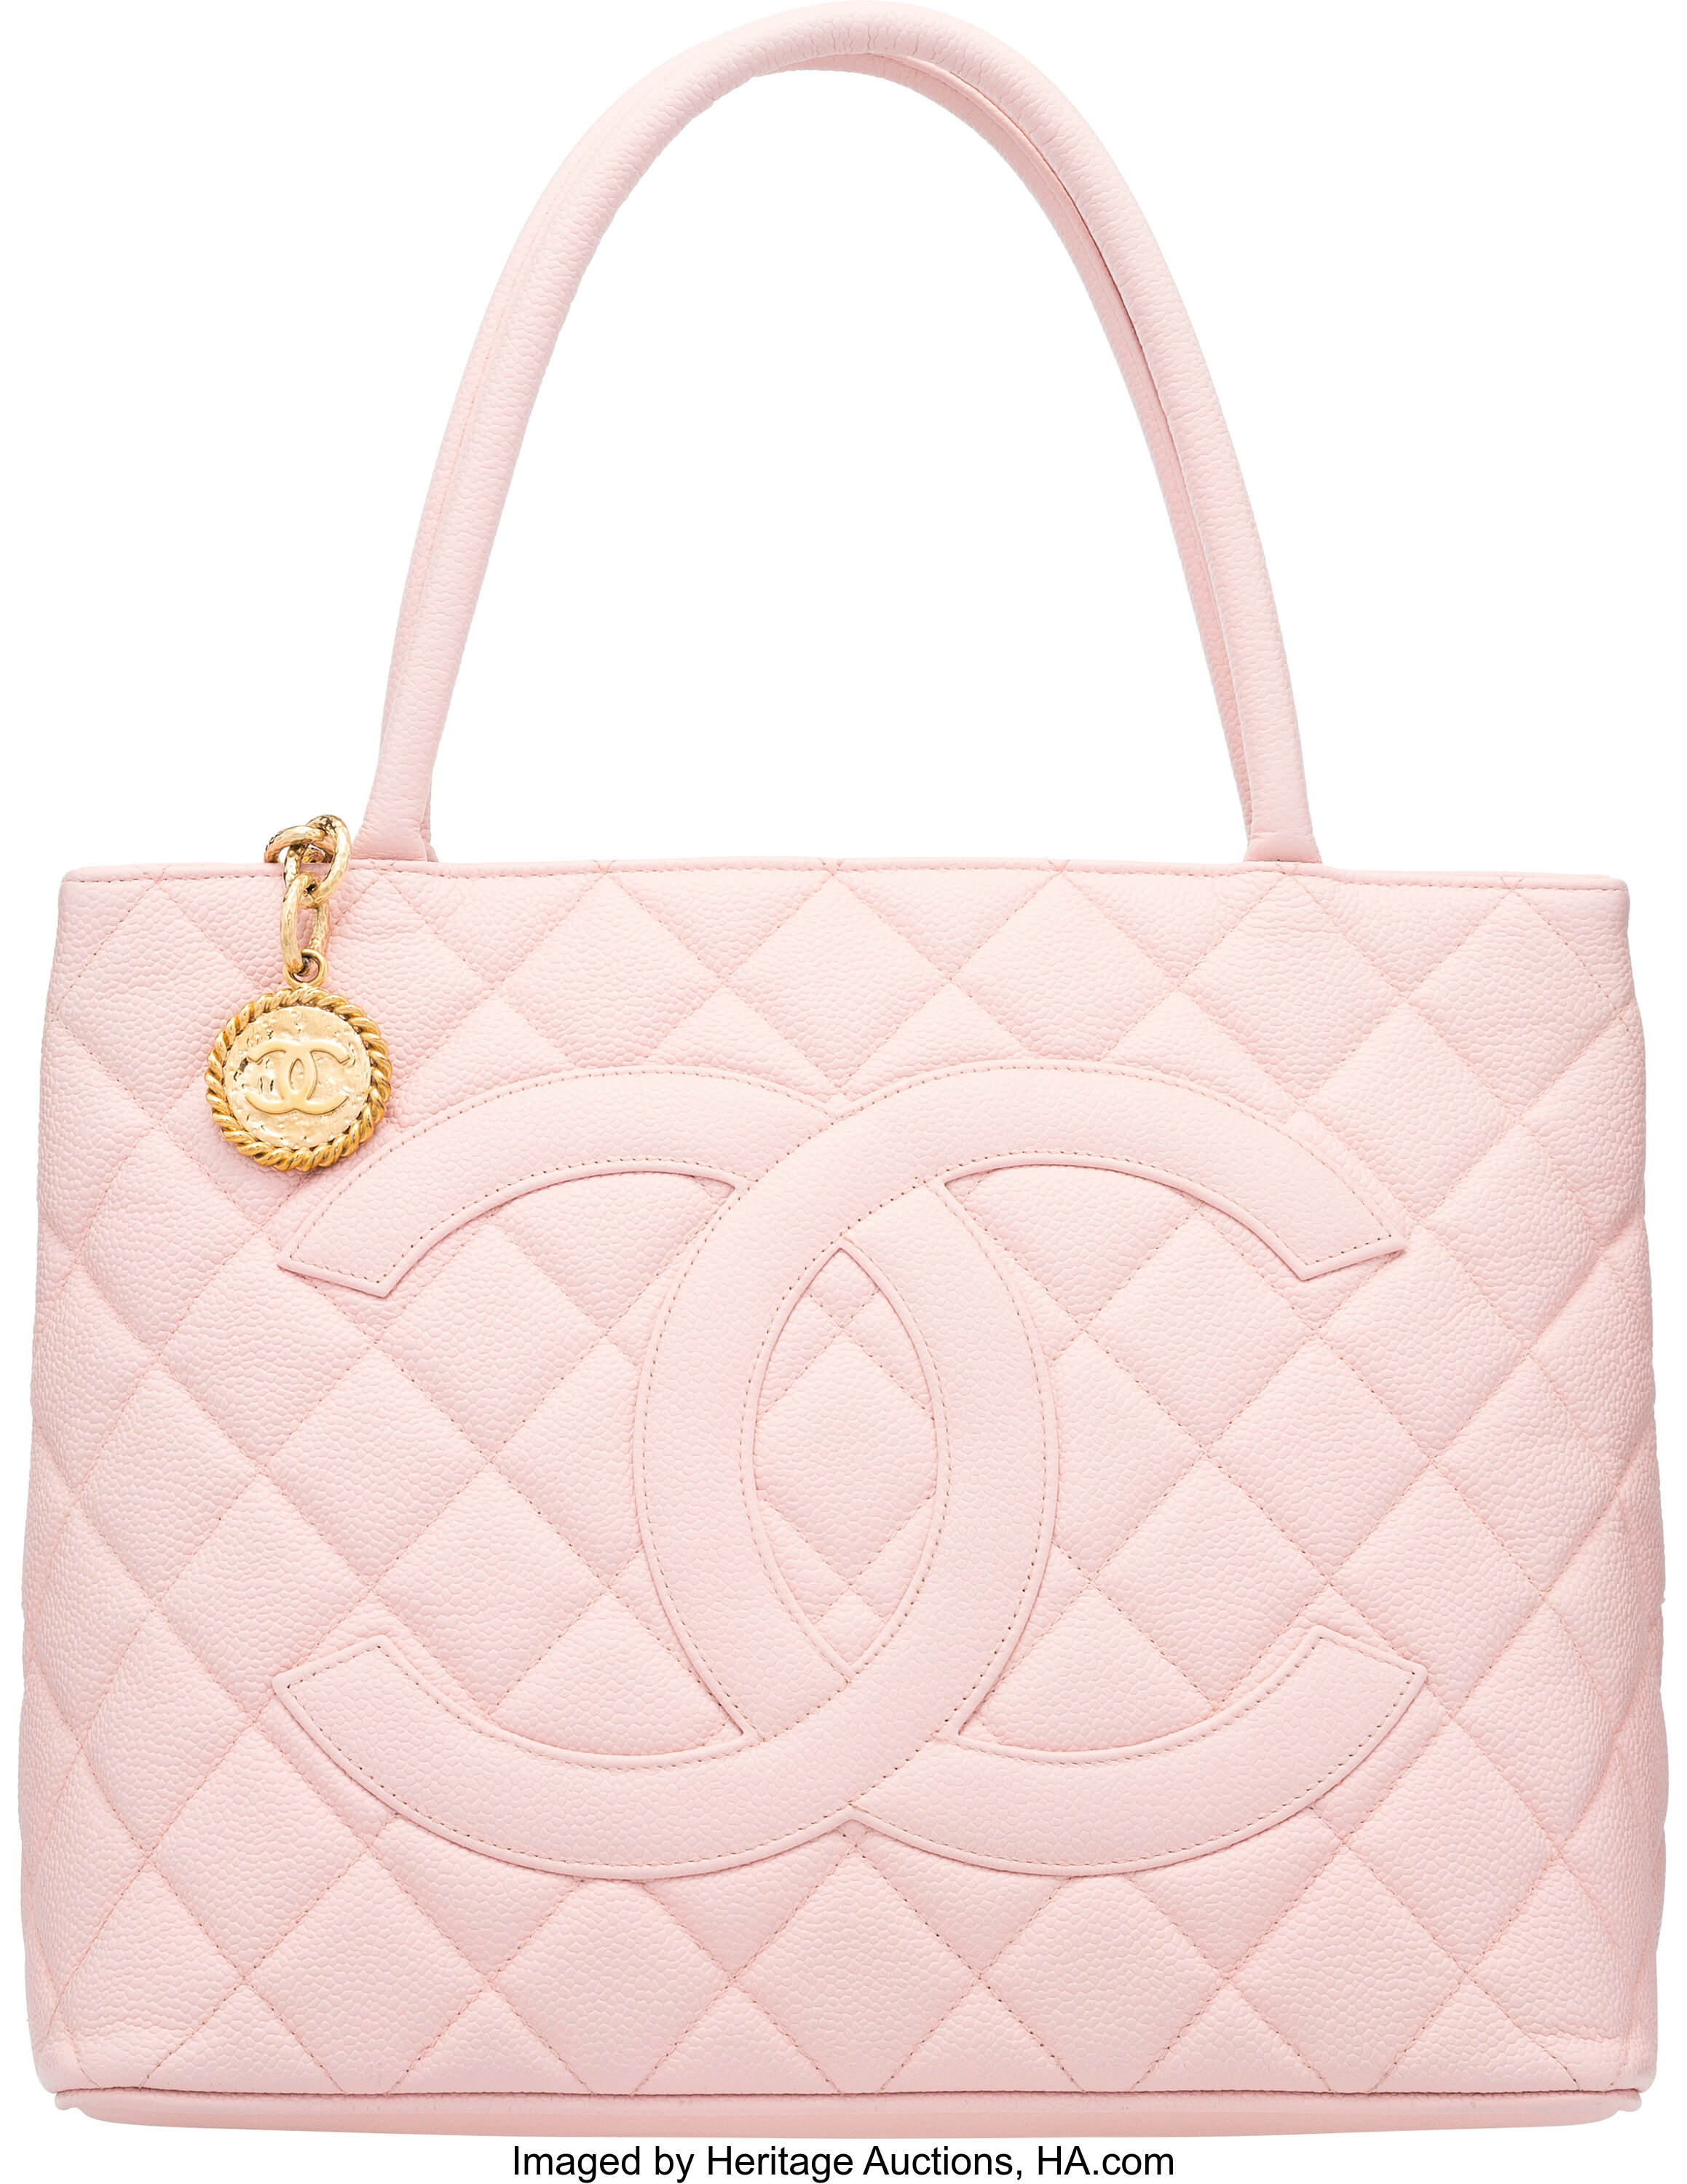 Chanel Light Pink Quilted Caviar Leather Medallion Tote Bag., Lot #58229